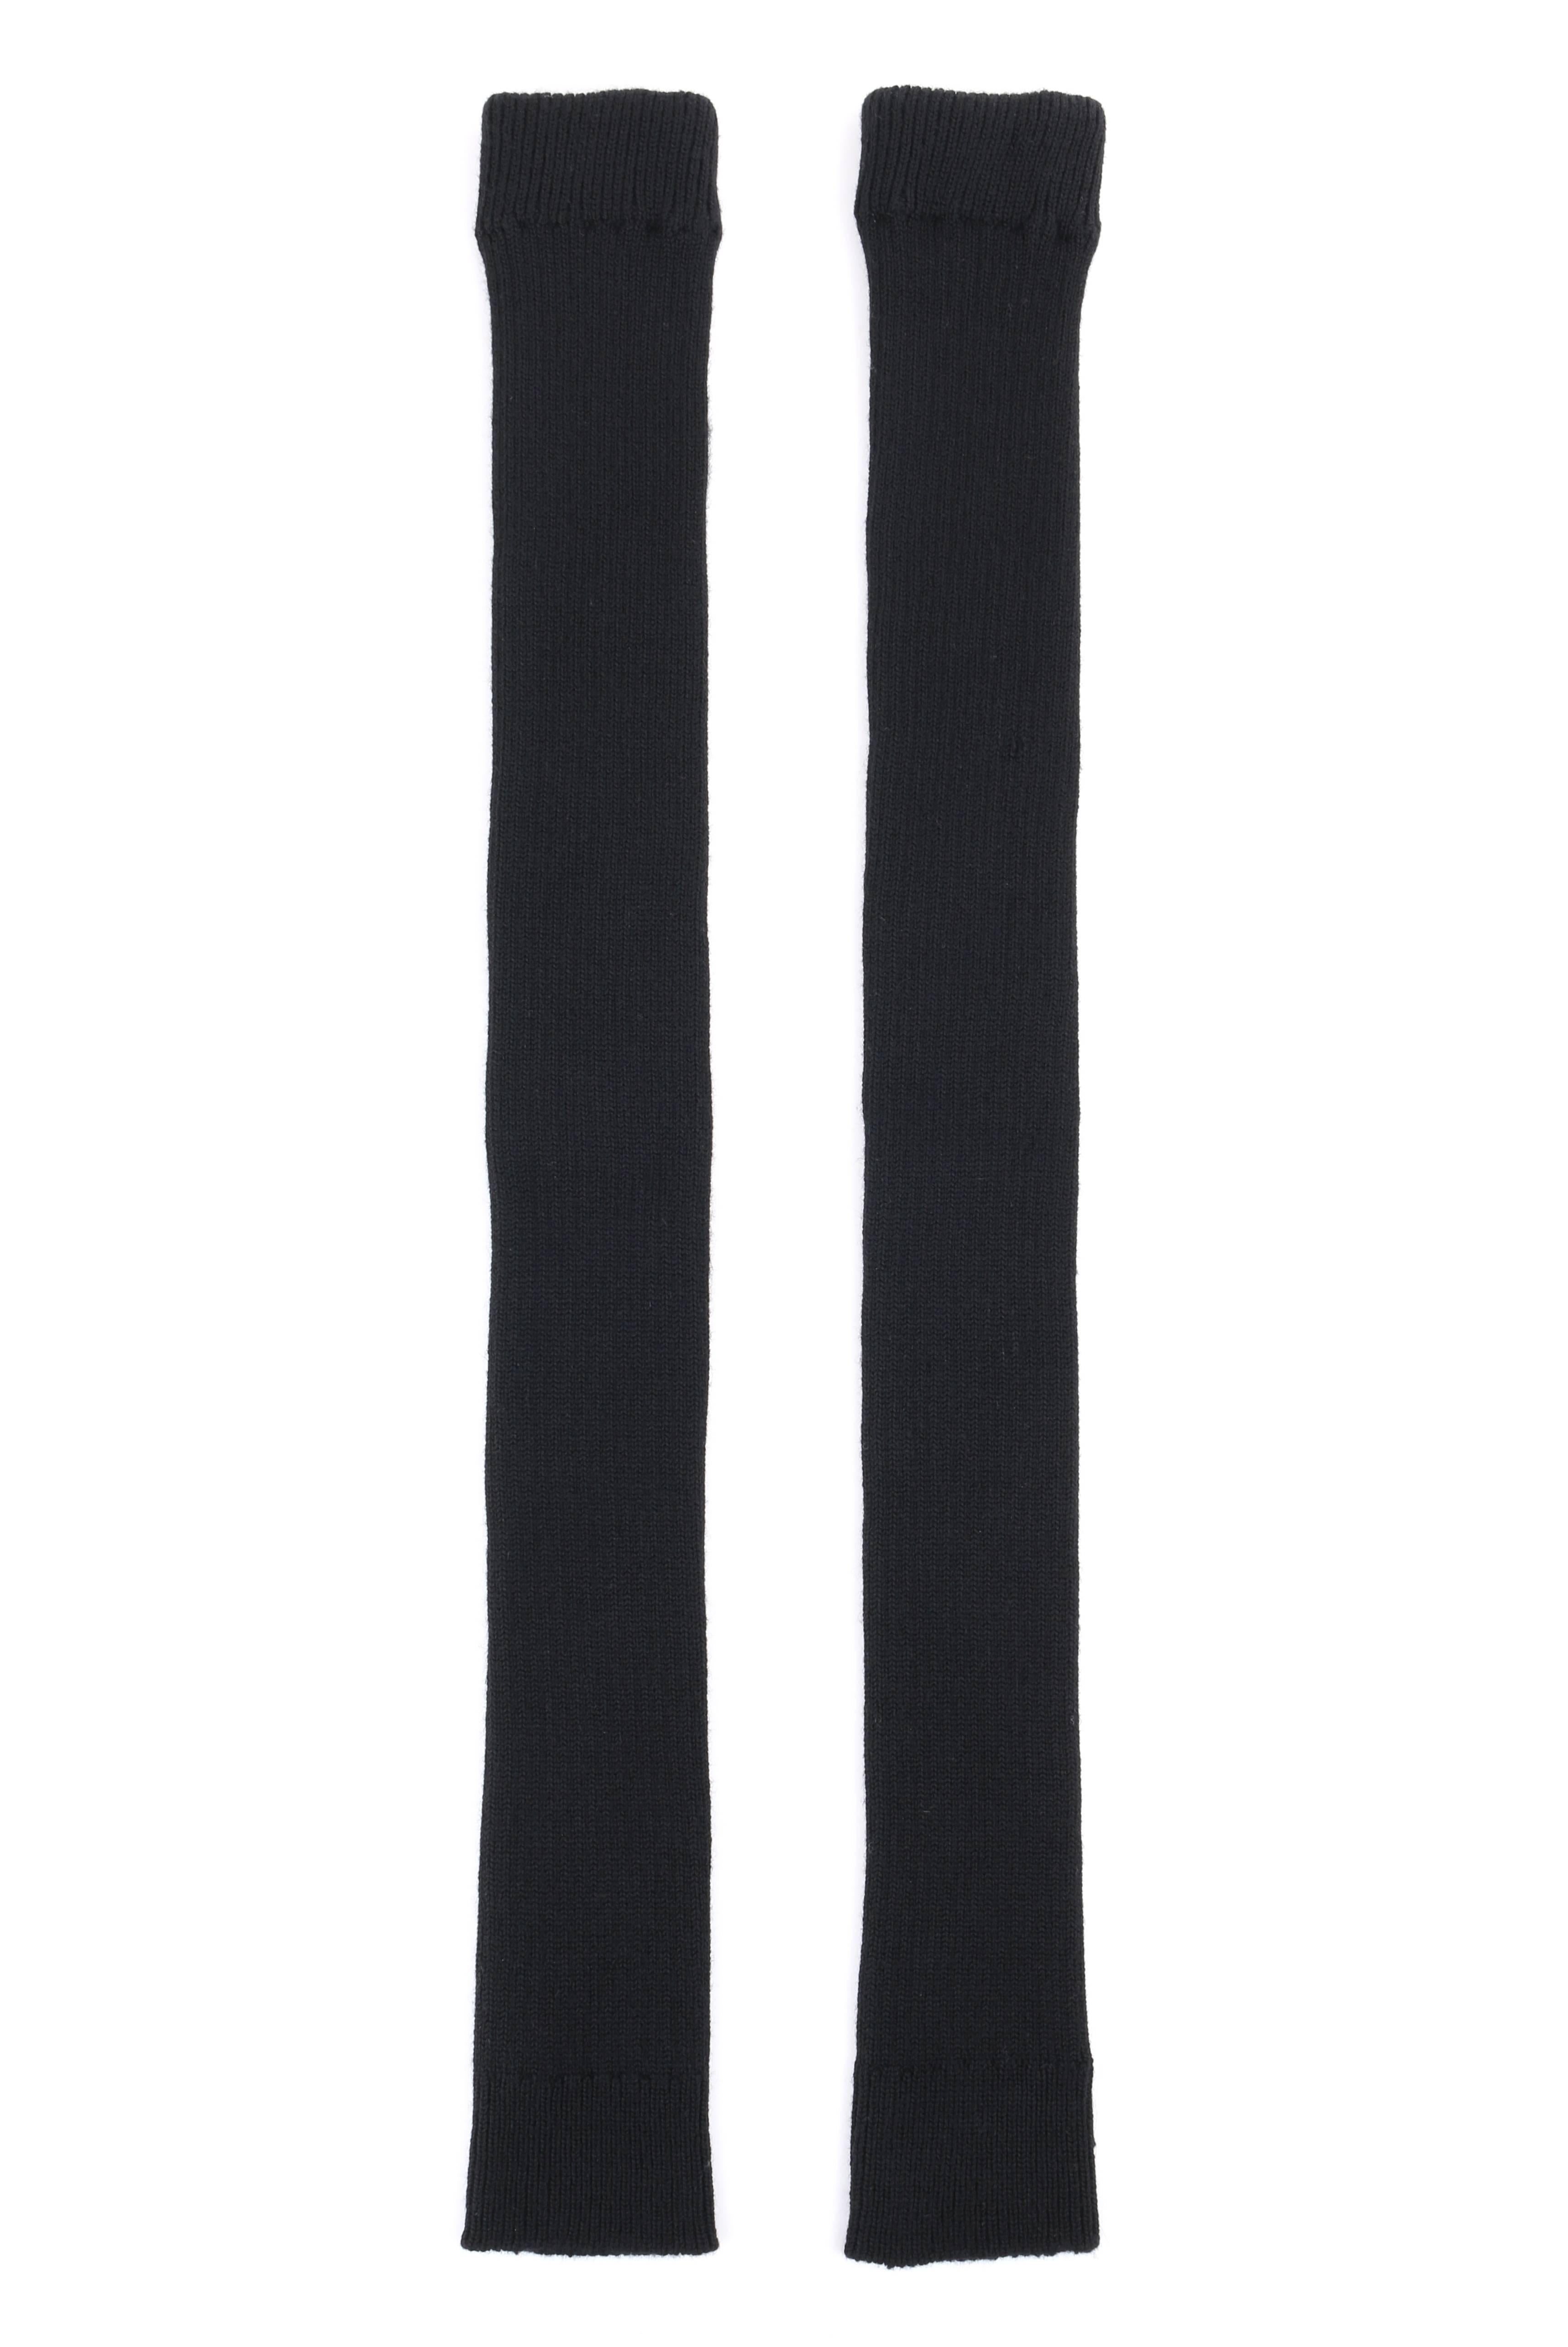 JUNYA WANTANABE for COMME DES GARCONS A/W 2005 Black Wool Knit Leg / Arm Warmers 1